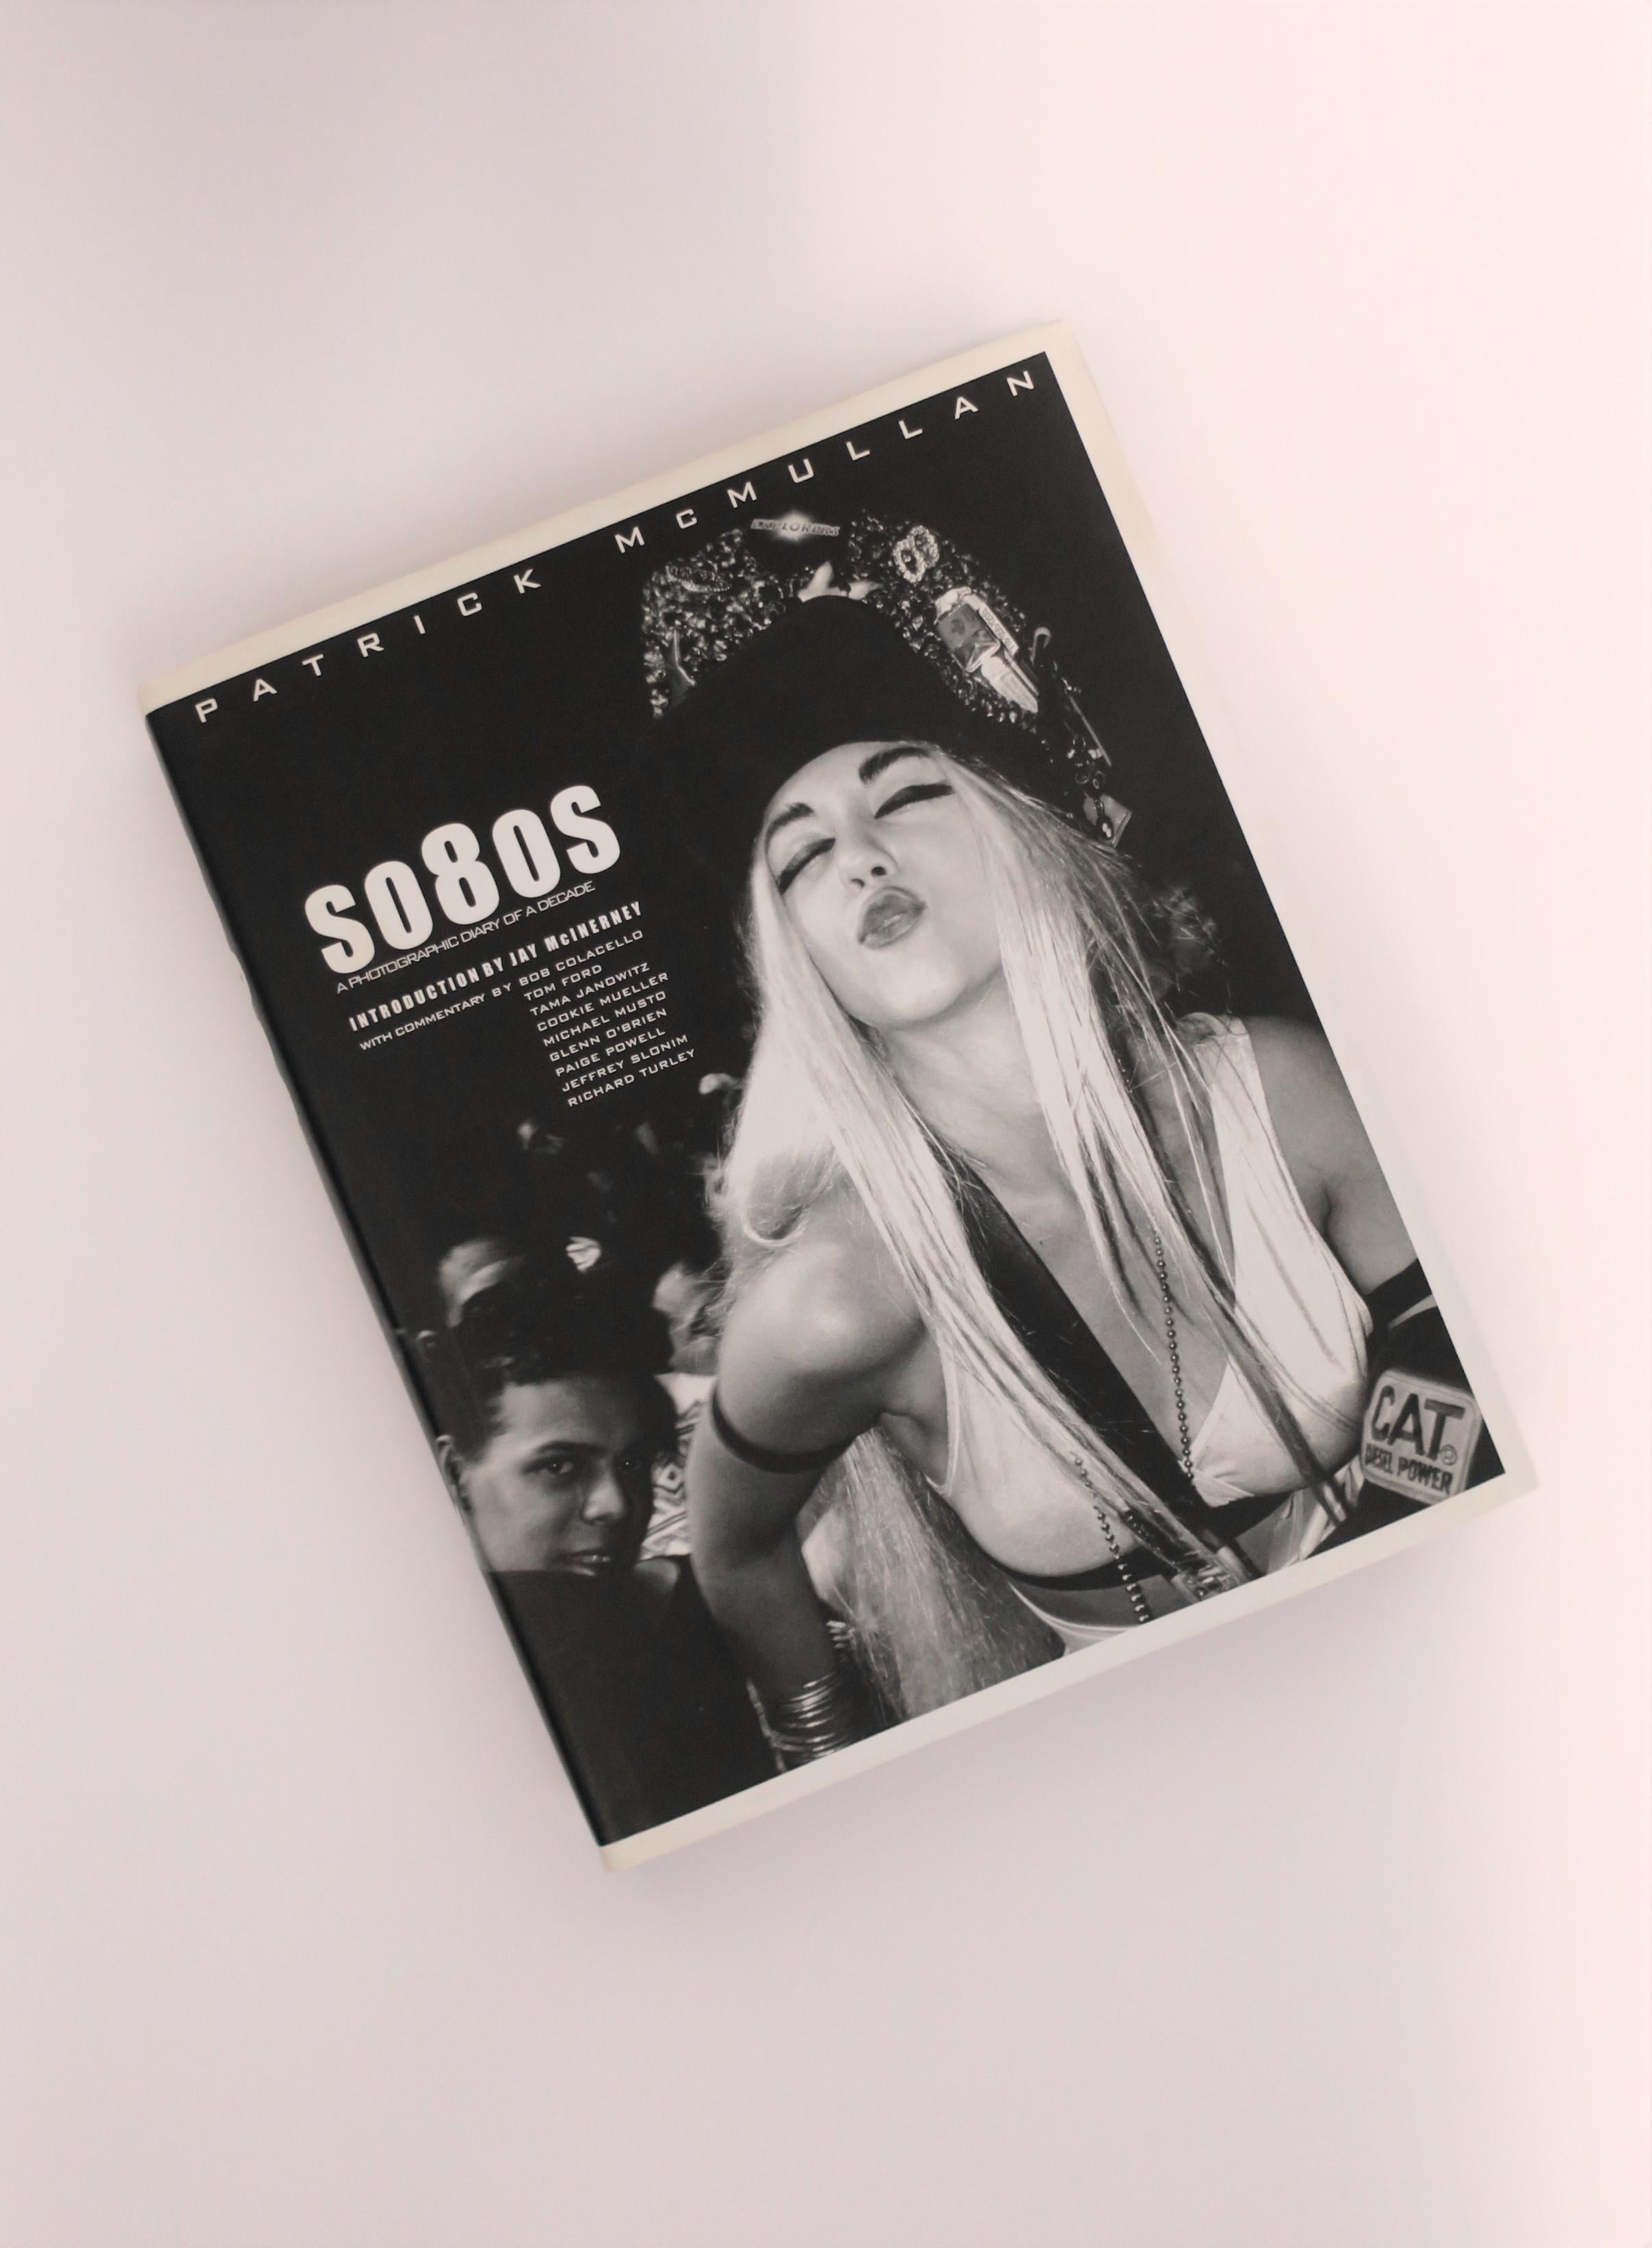 So80s, a photographic diary of a decade, by Patrick McMullan.
Book includes iconic people such as Andy Warhol, JFK Jr., Grace Jones, Jean-Michel Basquiat and Bruce Springsteen to name a few, from iconic NYC hot spots such as New York's social and